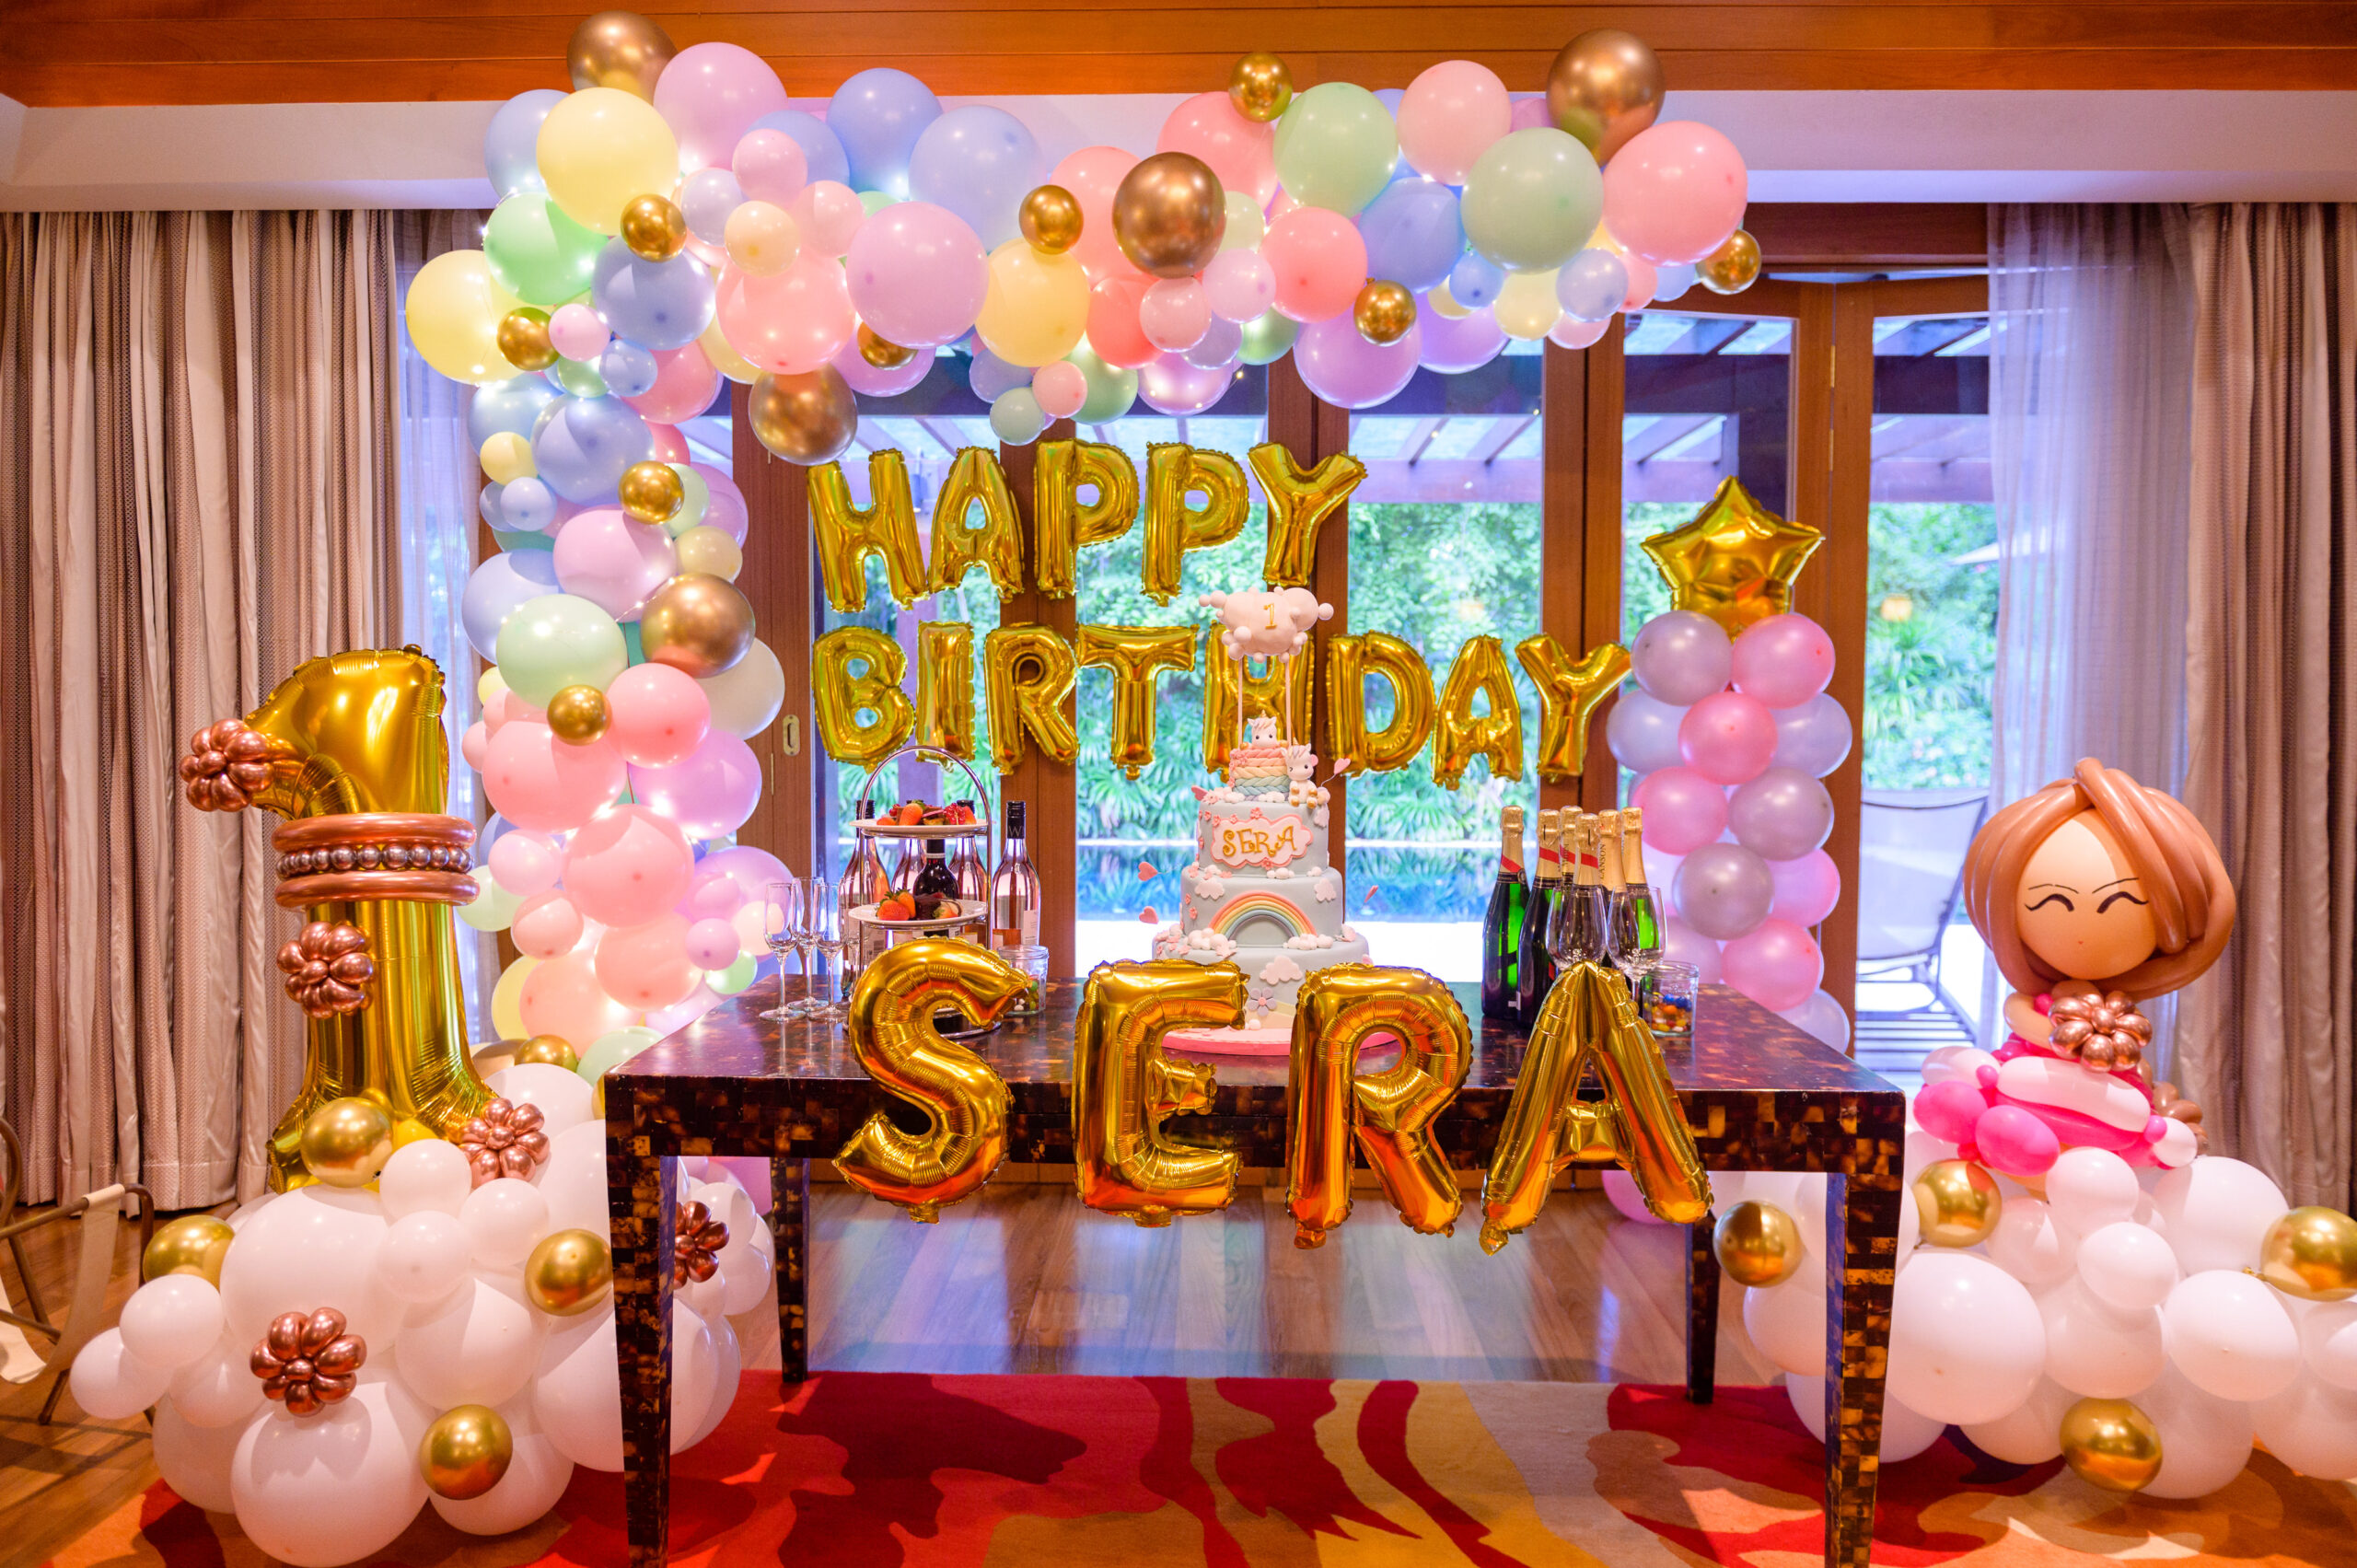 Customized Party Balloon decorations